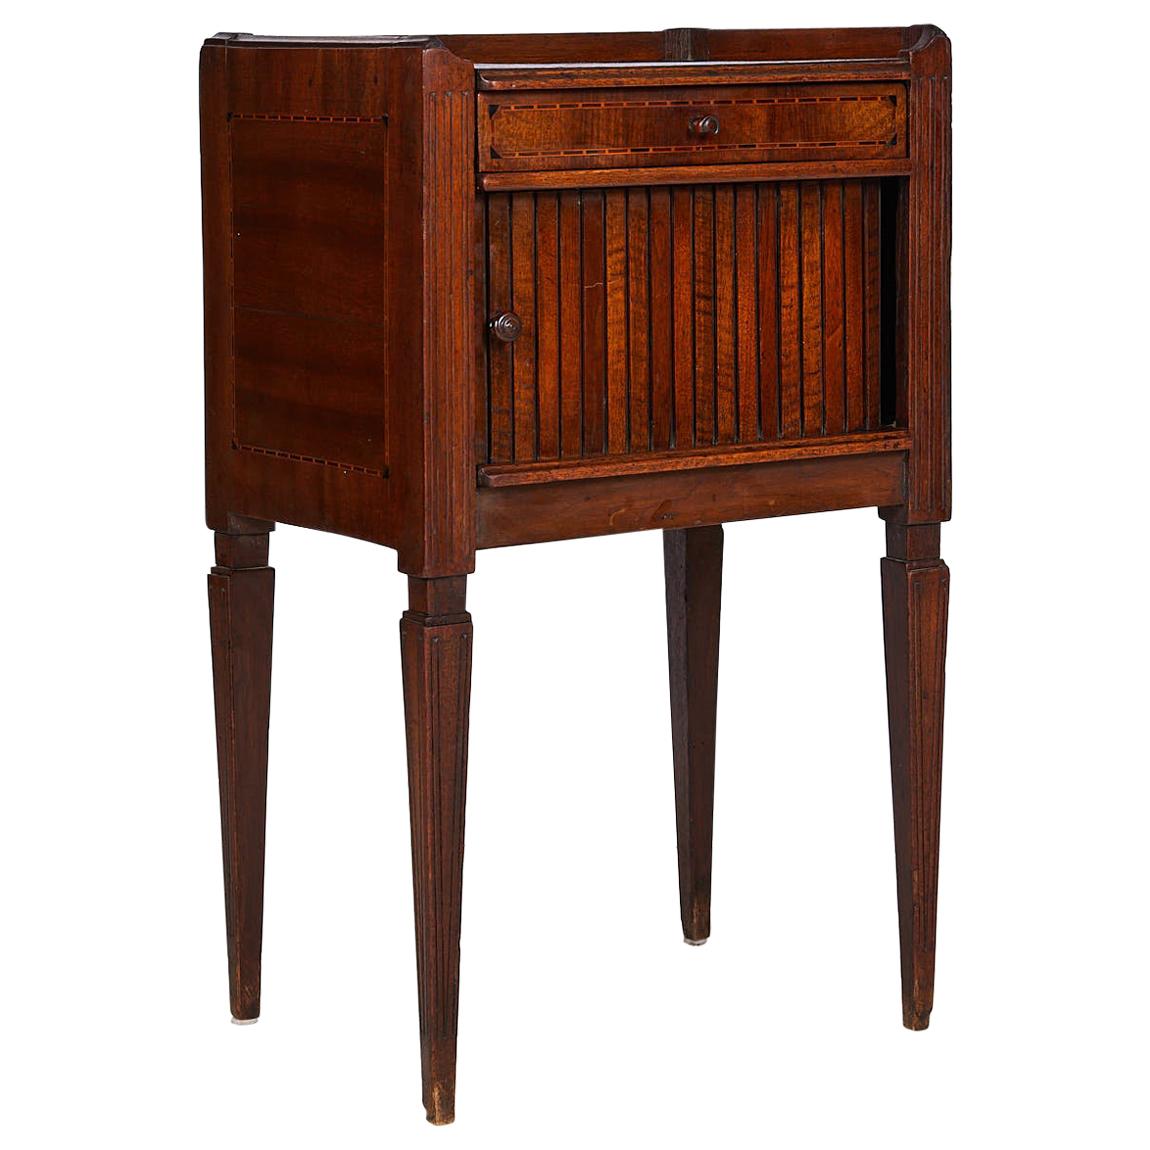 19th century neoclassical Italian side table of mahogany, walnut, satinwood, and ebony. The table has a decorative band of inlay inset on the top with a gallery surrounding it on three sides. The case, with inlay on either side, holds an inlaid